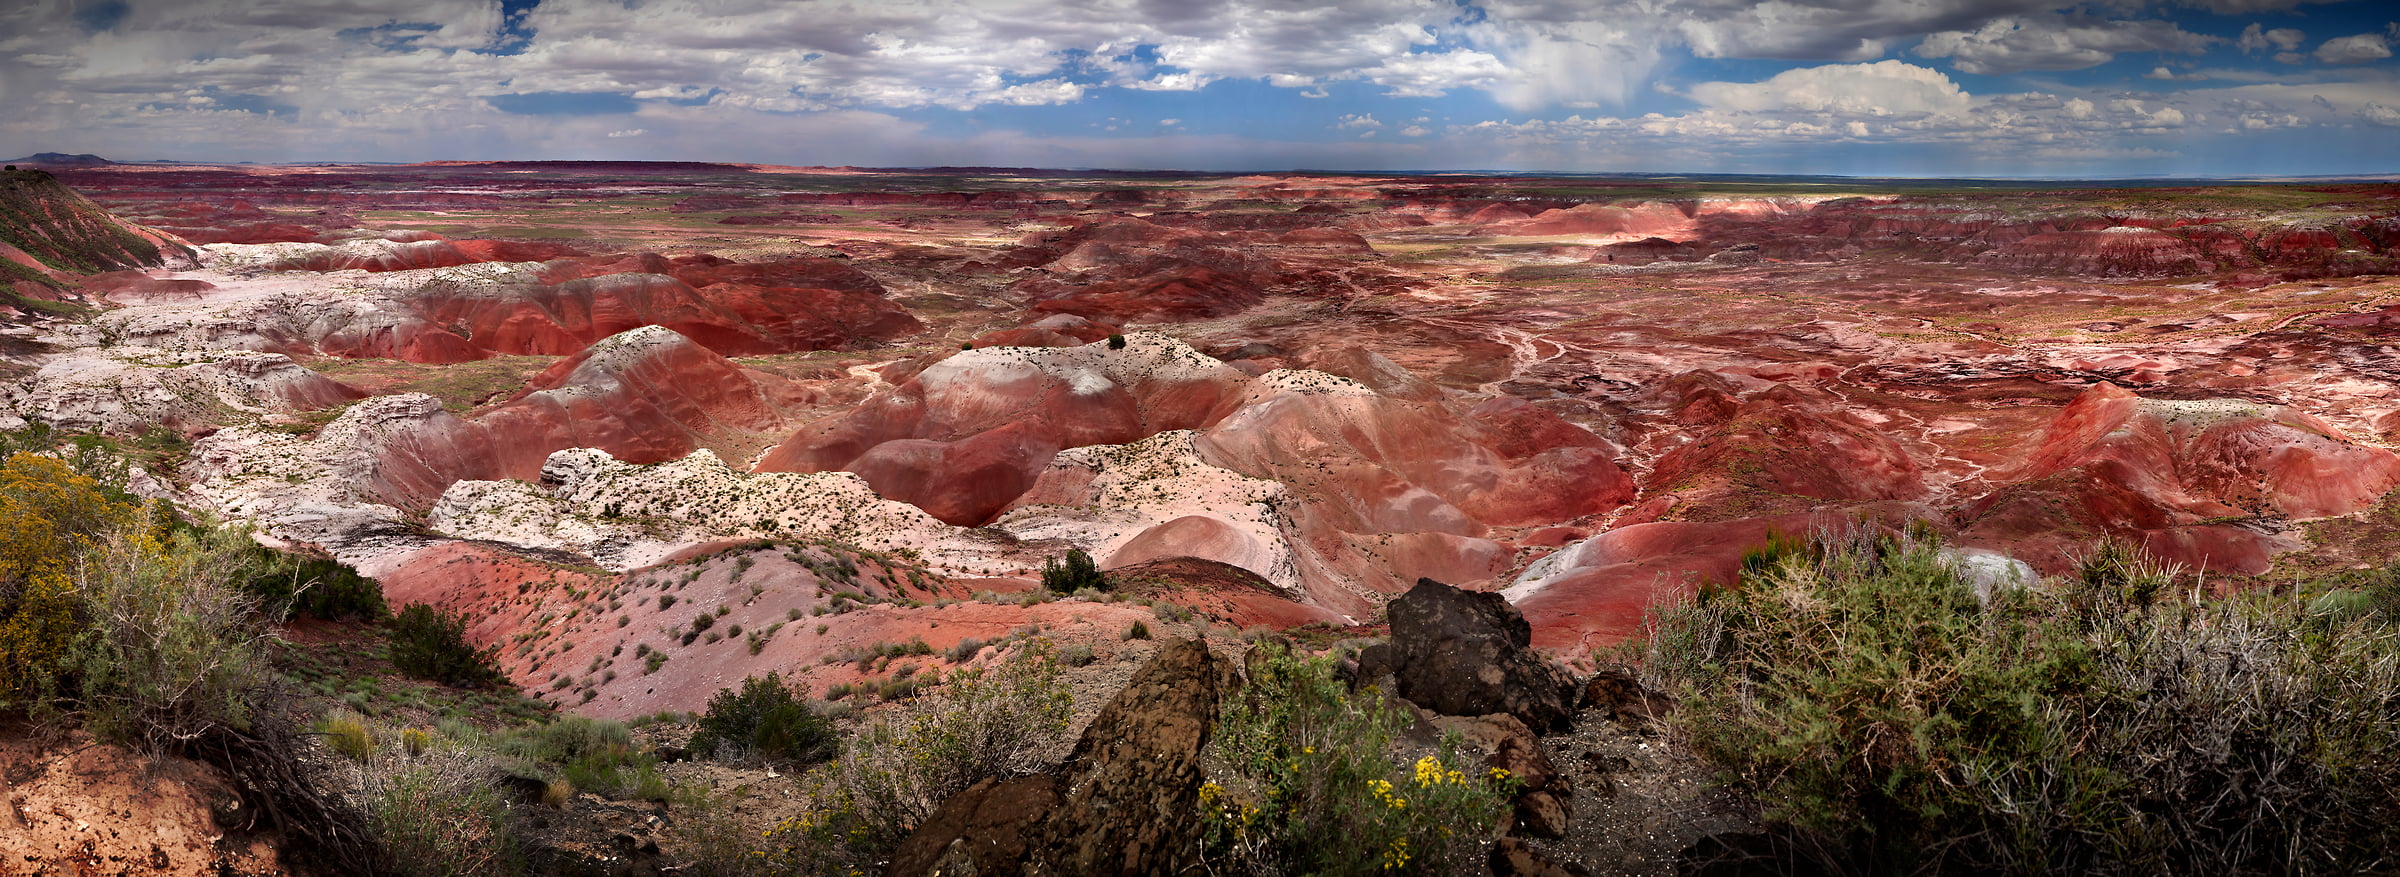 329 megapixels! A very high resolution american landscape photograph; VAST photo created by Phil Crawshay in Petrified Forest National Park, Arizona.